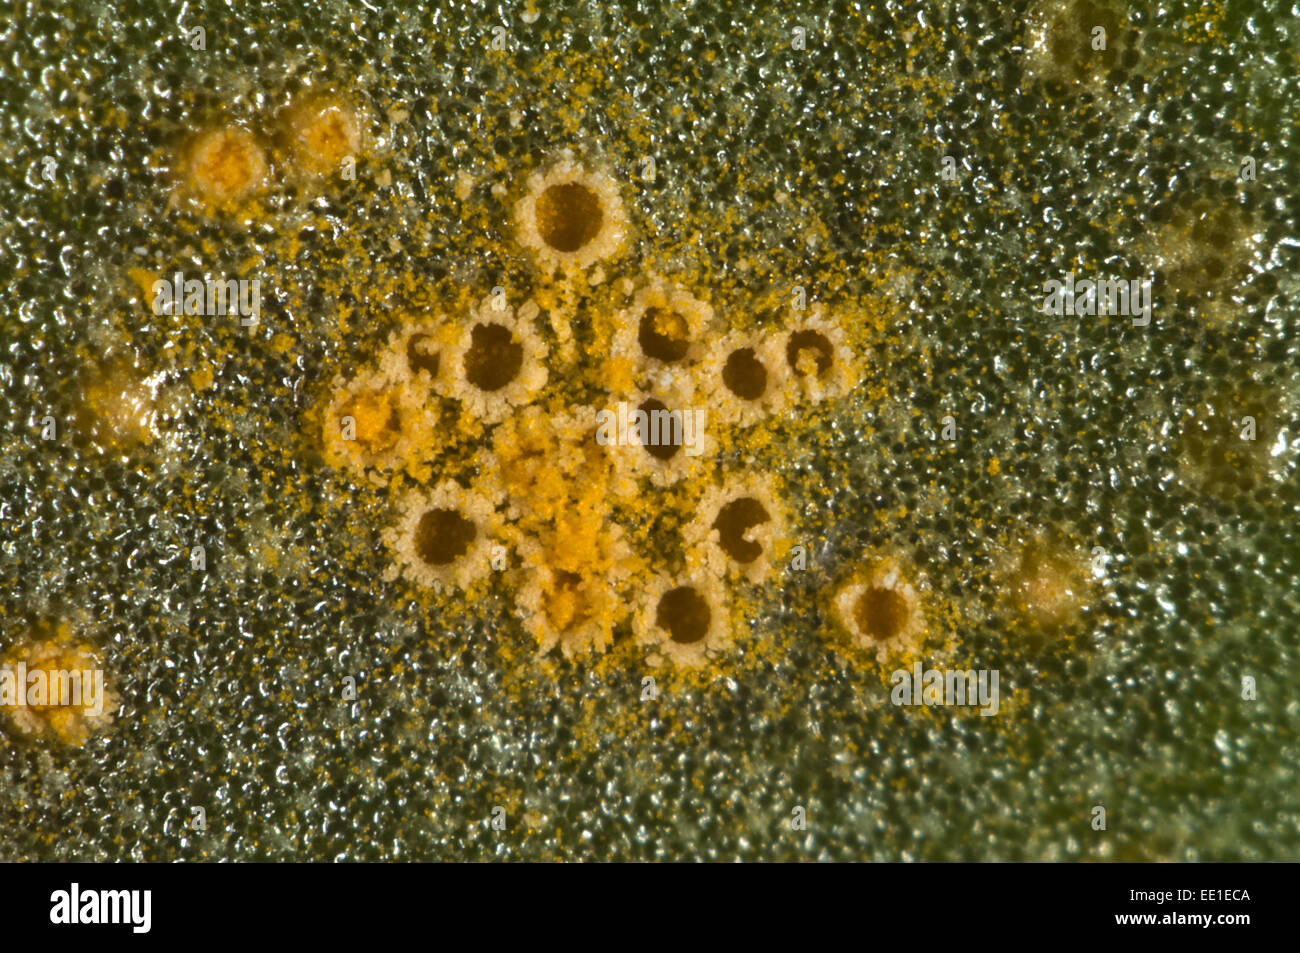 Photomicrograph of the aecia of groundsel rust, Puccinia lagenophorae, on the leaf surface of the weed groundsel, Senecio vulgaris, Stock Photo